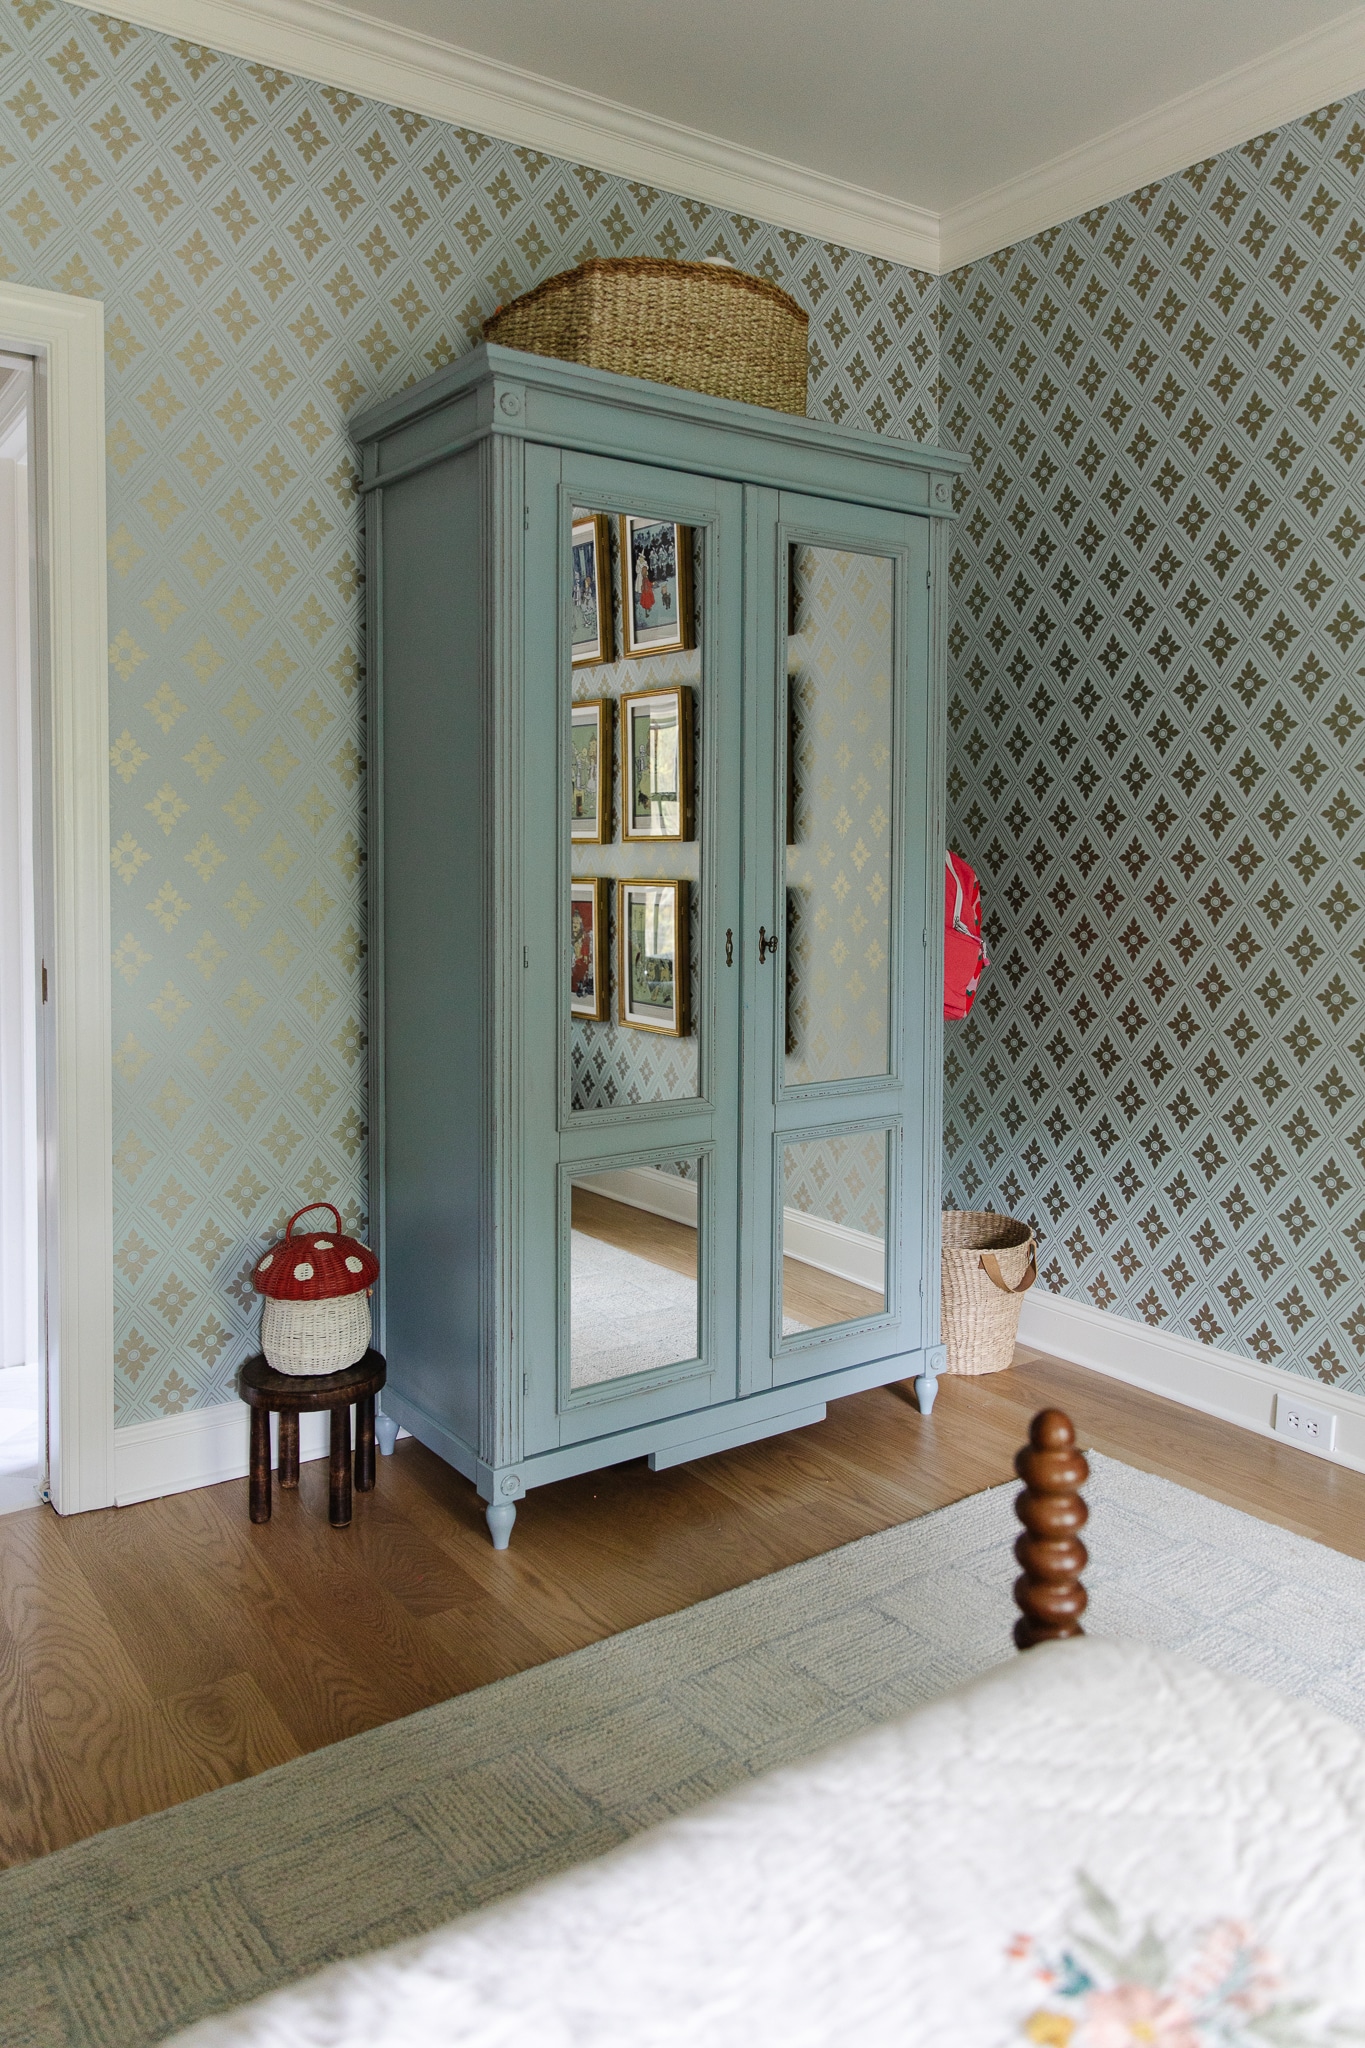 Chris Loves Julia | Faye's bedroom with teal blue wallpaper and teal wardrobe with mirrored front